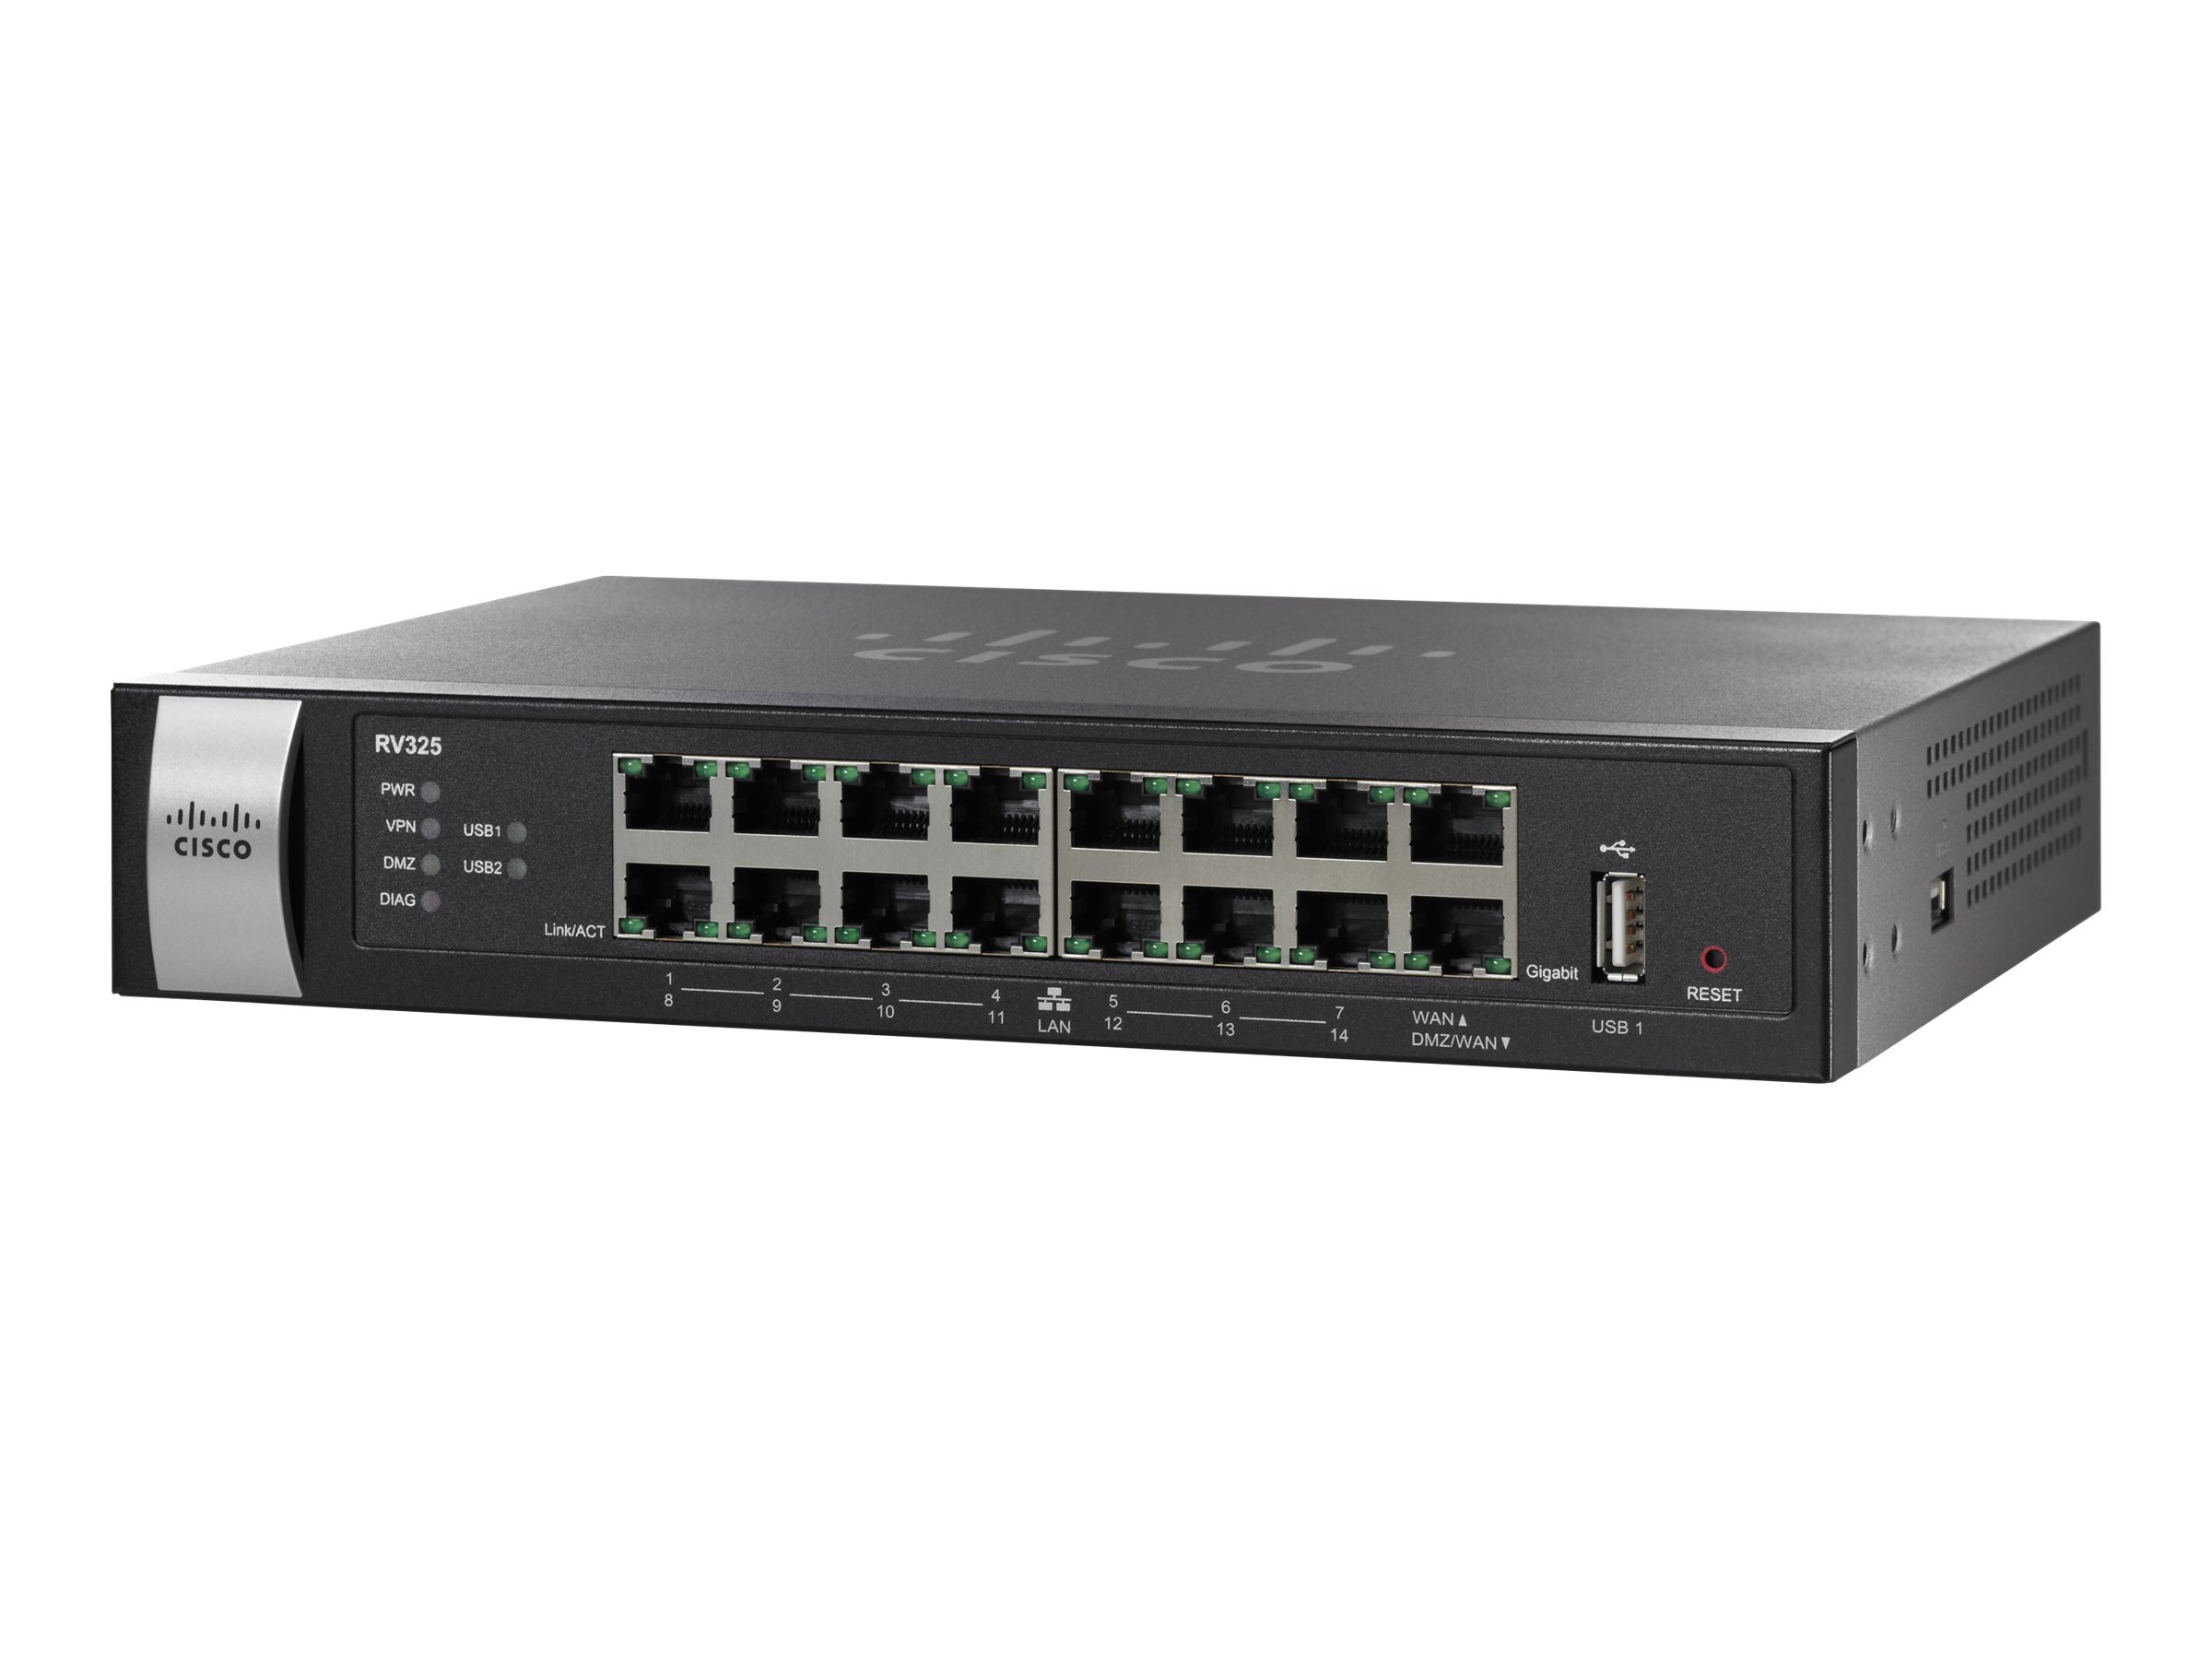 Cisco Small Business RV325 - Router - 14-Port-Switch